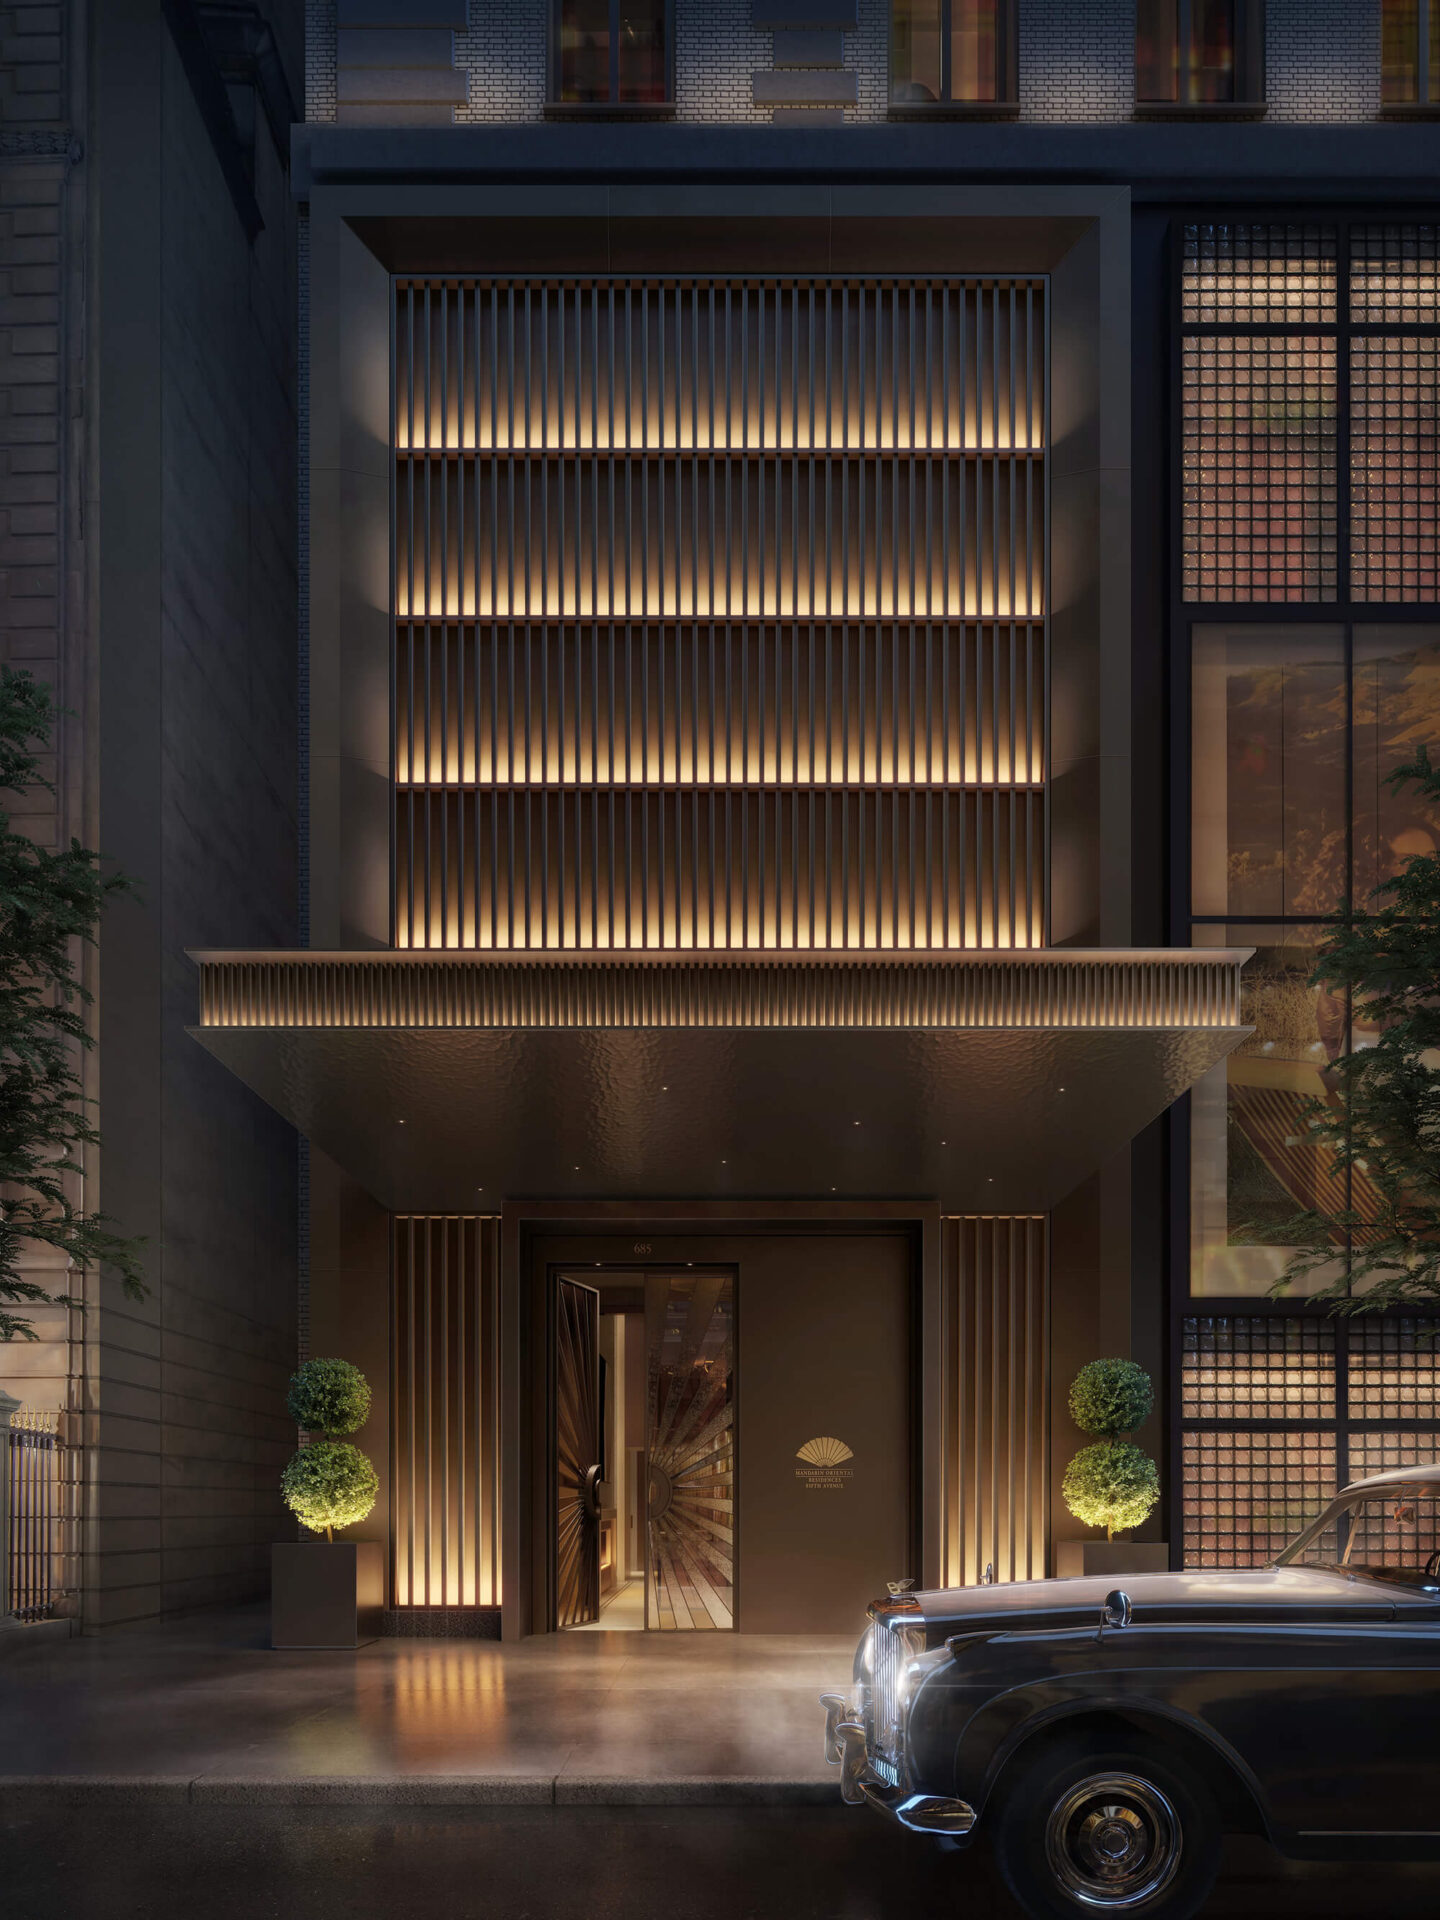 mandarin oriental 5th ave rendering of the entrance to the building